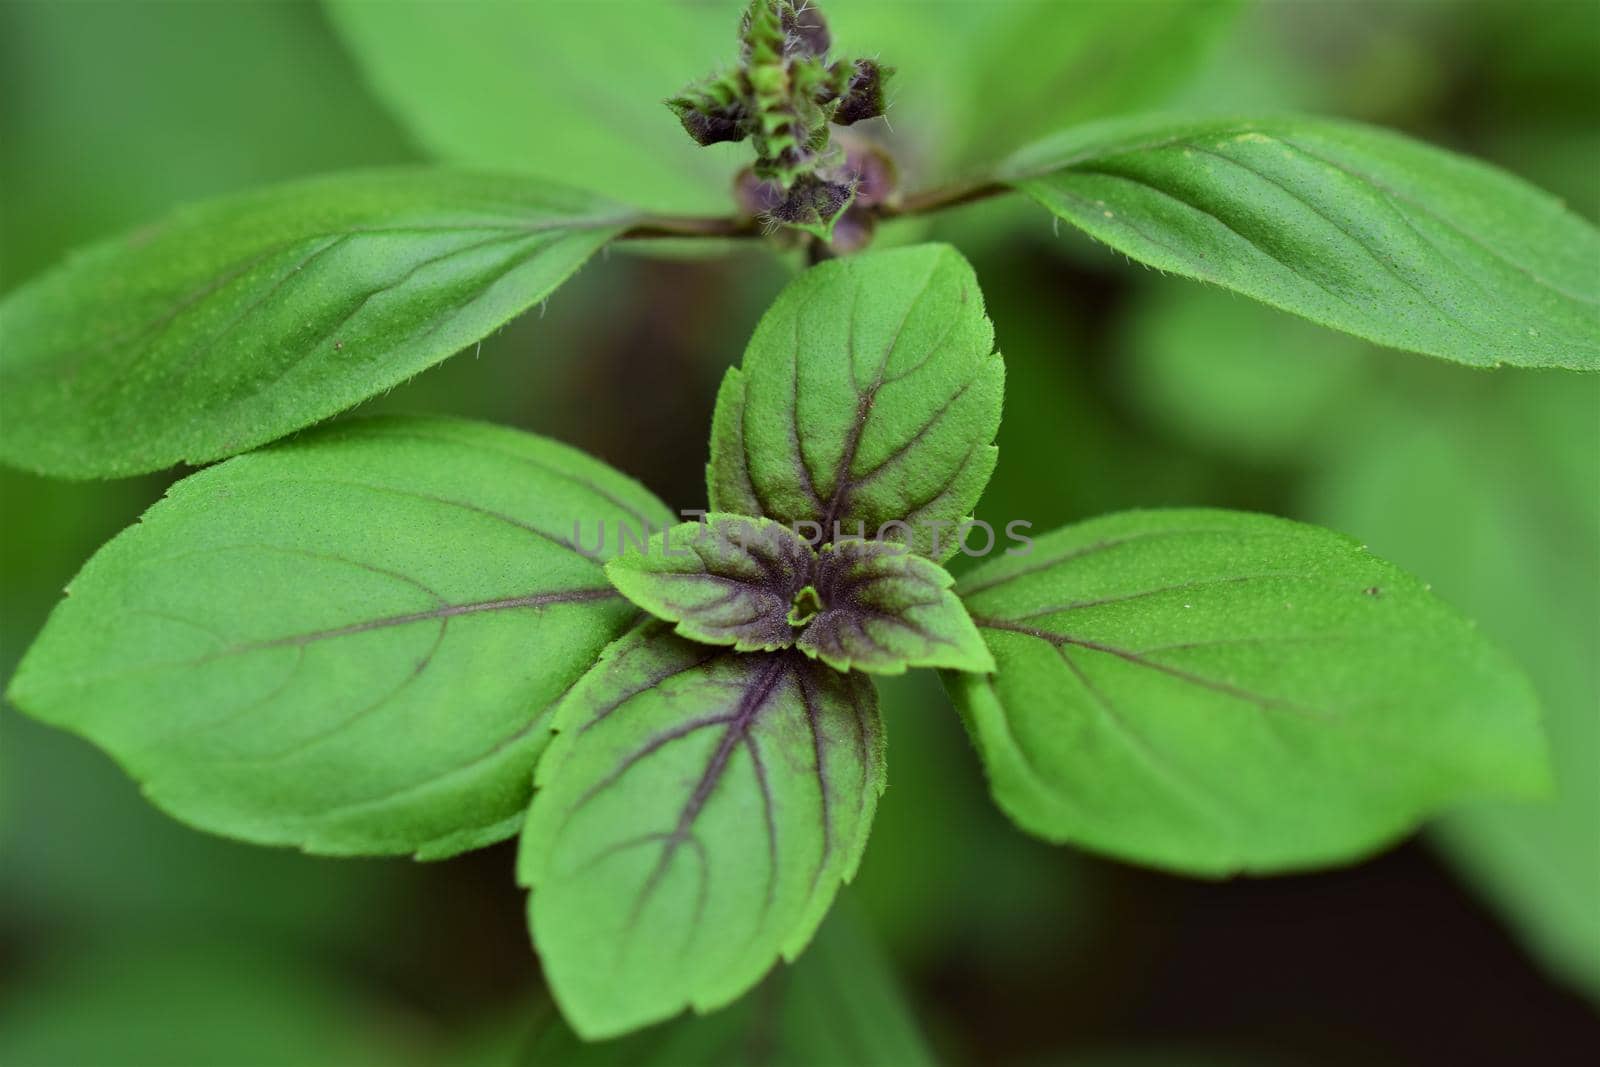 Close up of shrub basil against a blurred background by Luise123